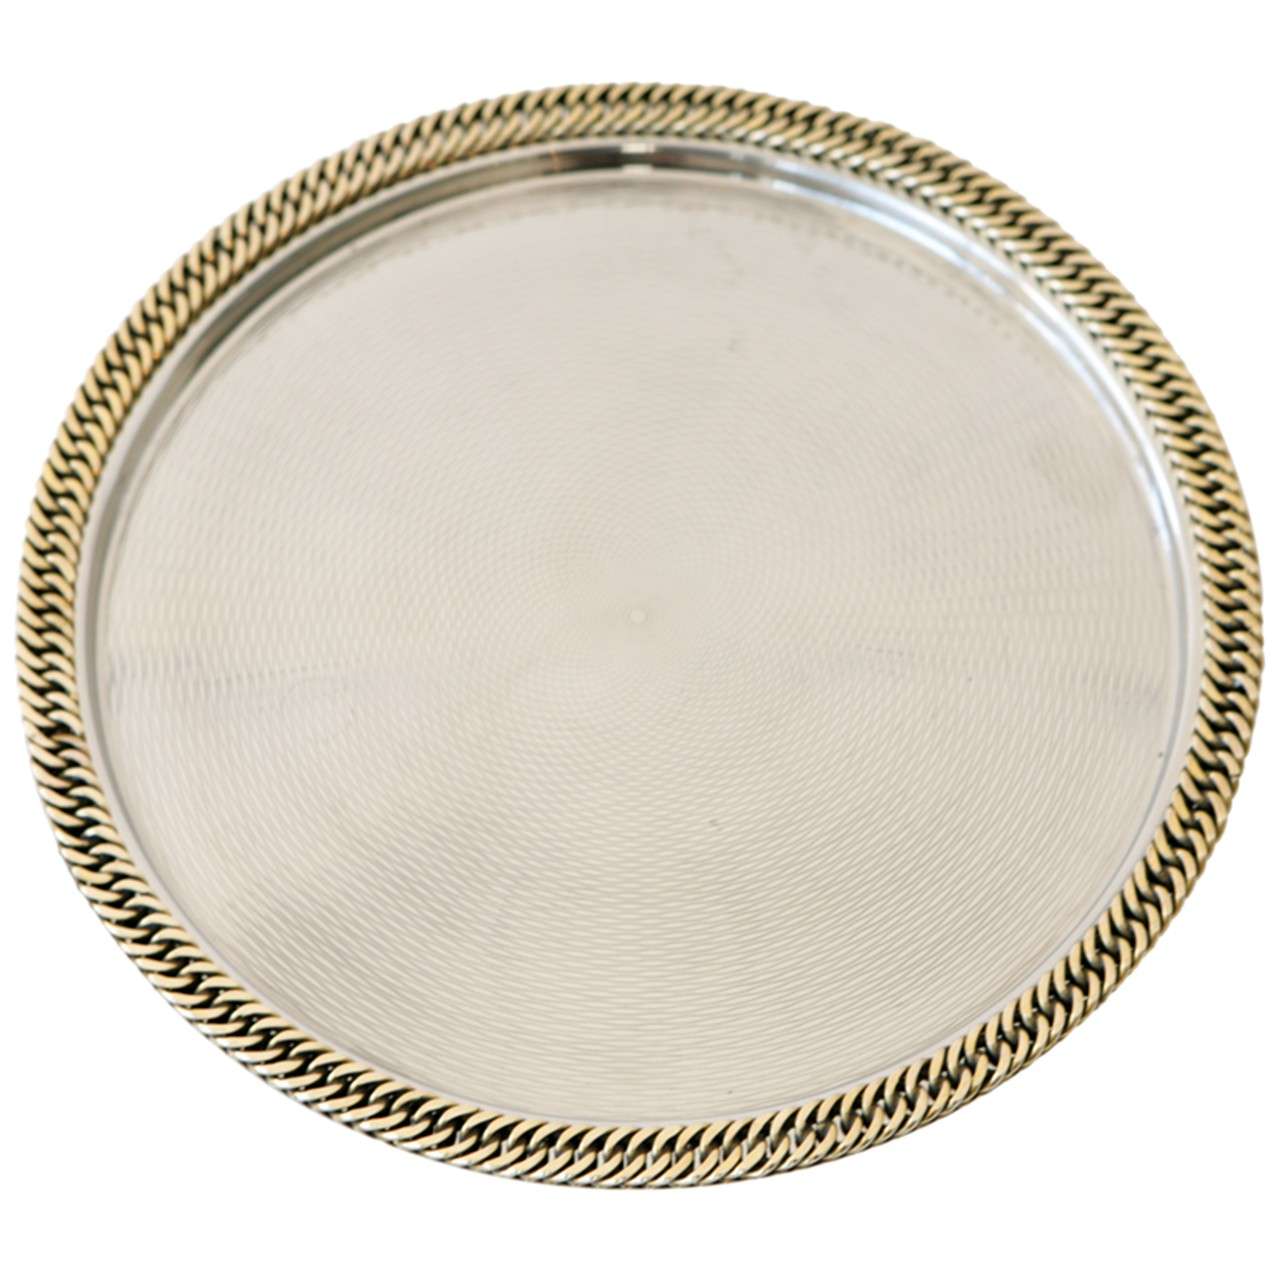 Classic Nickel Plate Tray with Chain Detail by Hermes